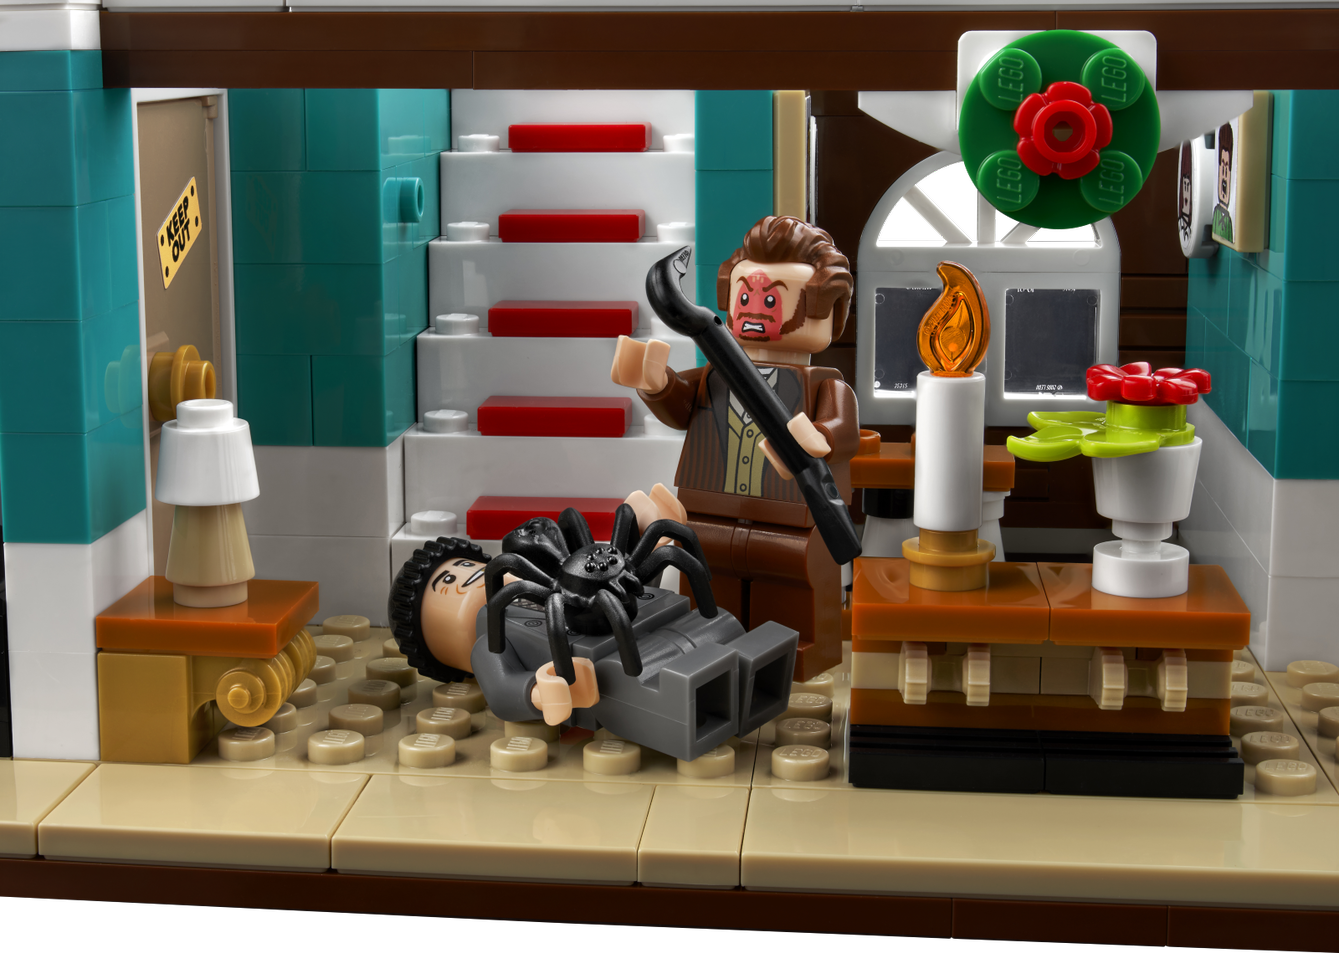 lego-ideas-home-alone-21330-ideas-buy-online-at-the-official-lego